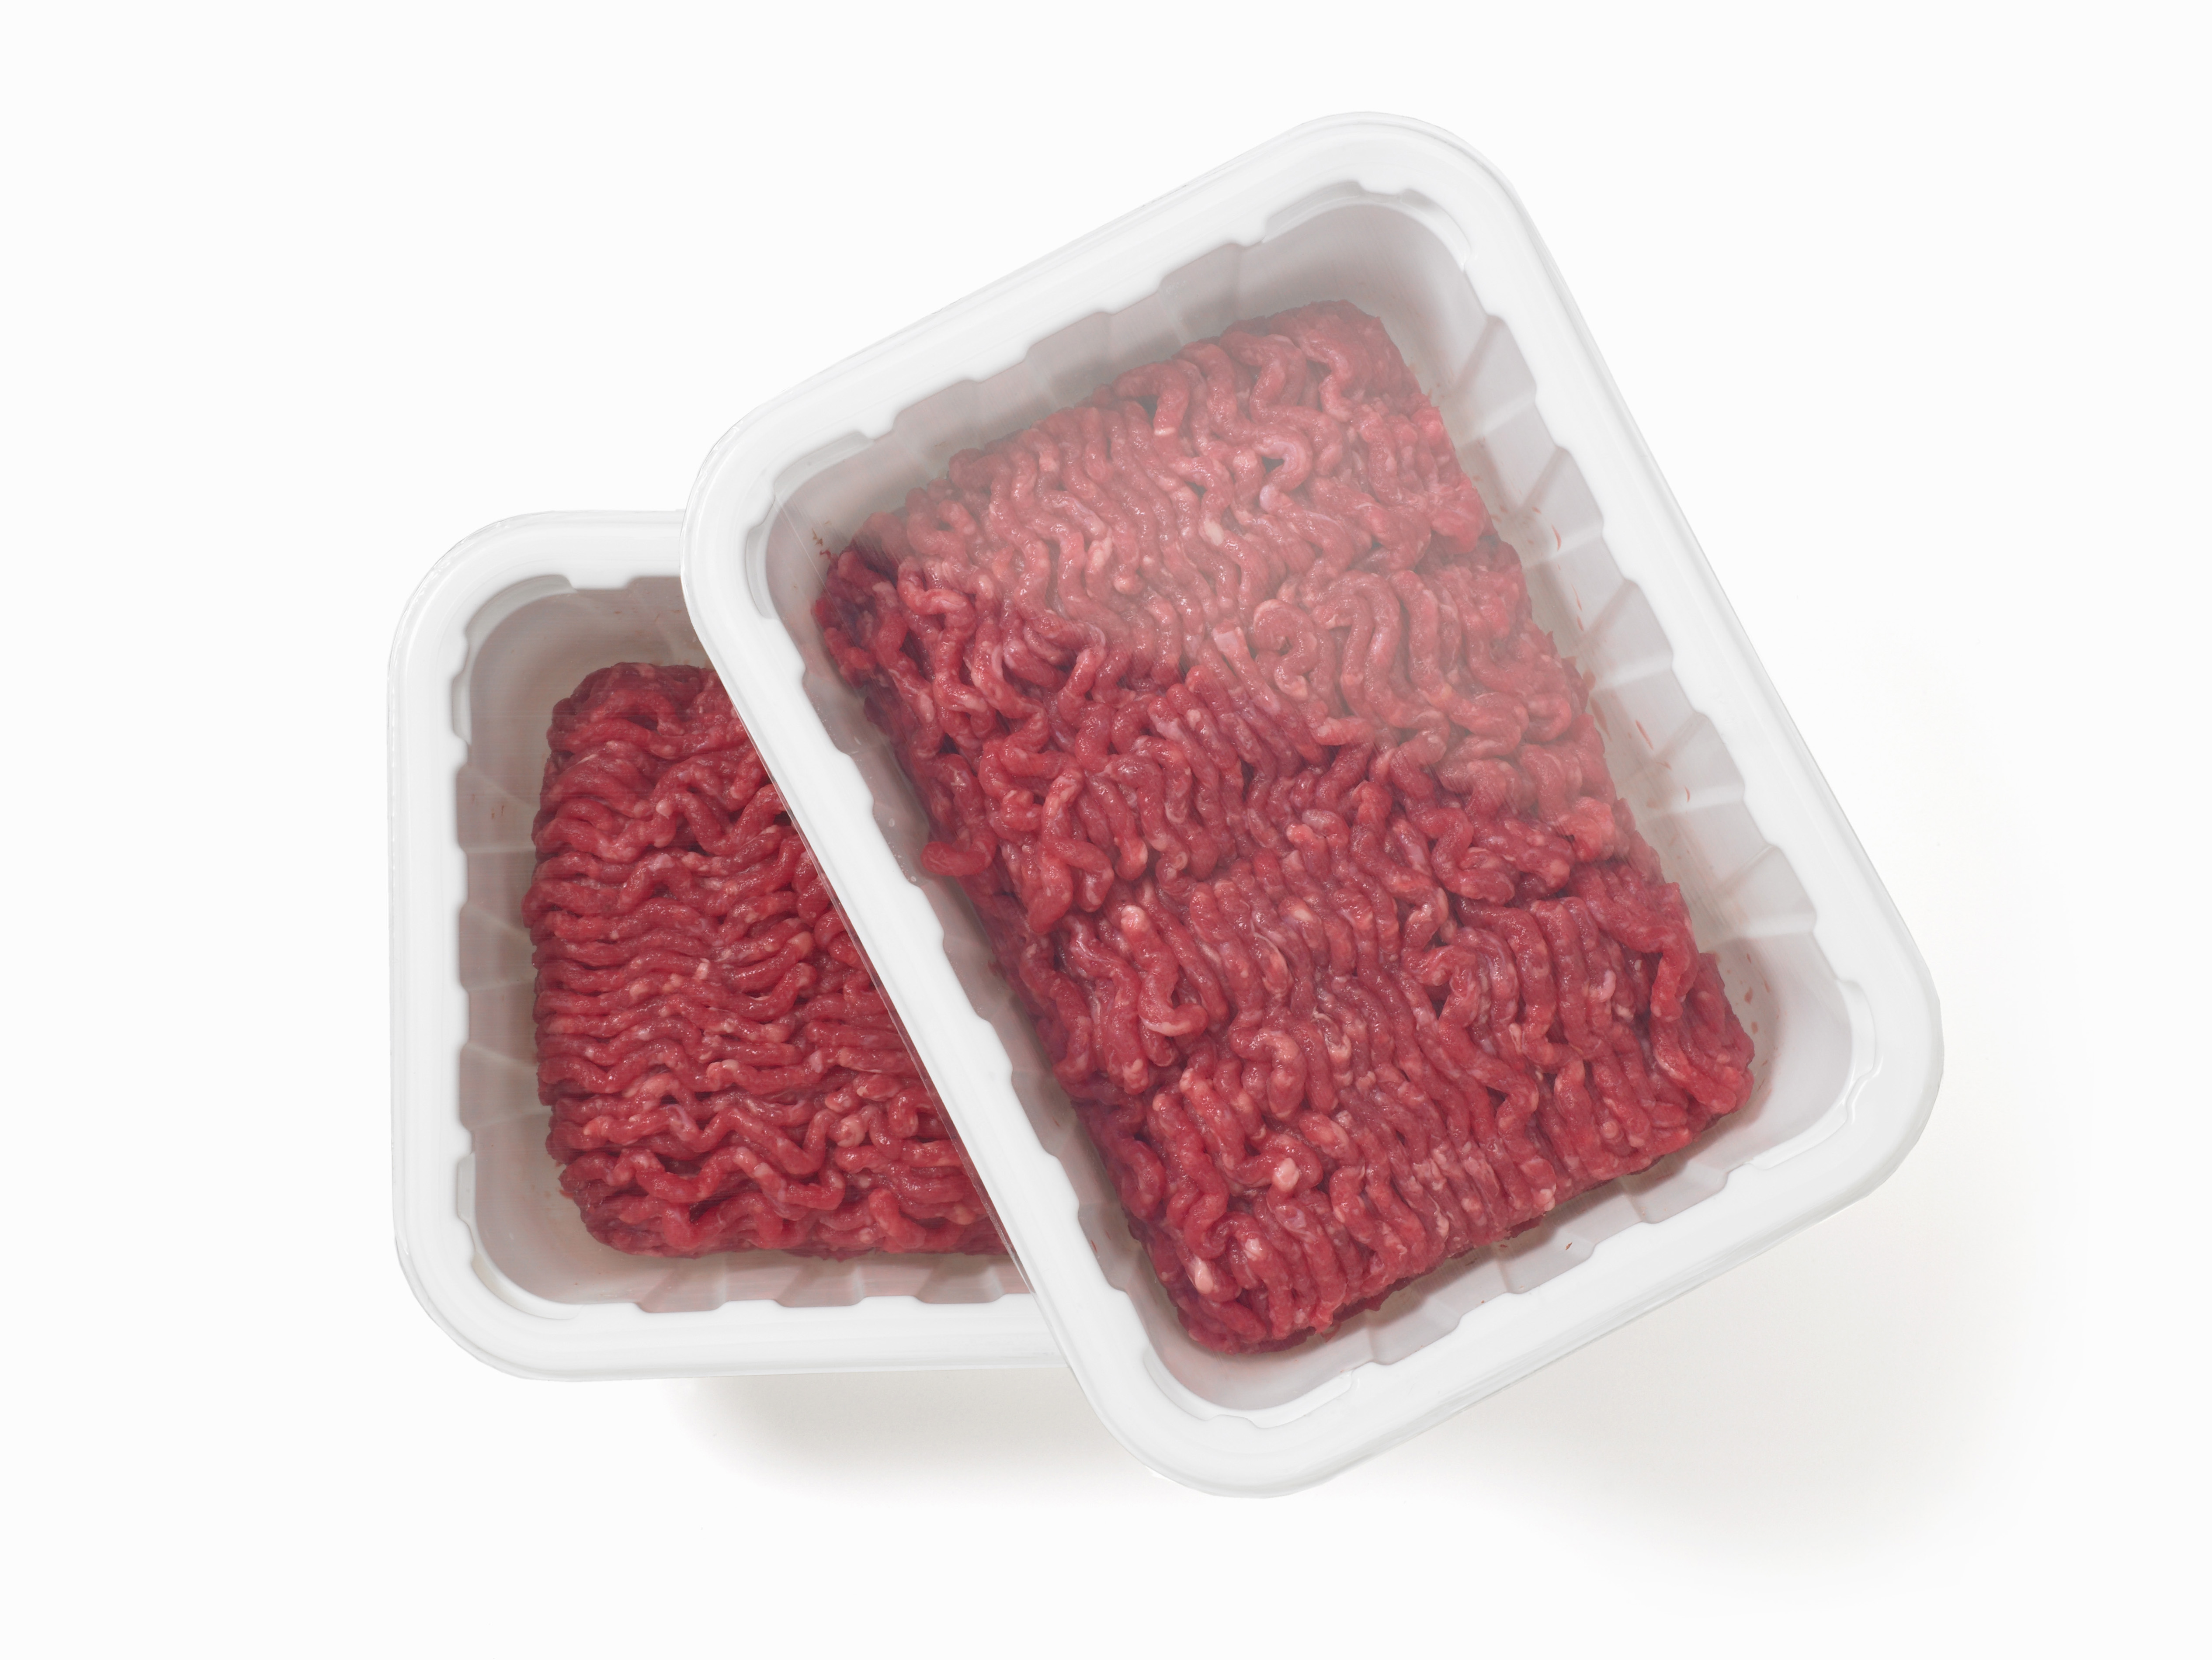 how long is frozen meat good for